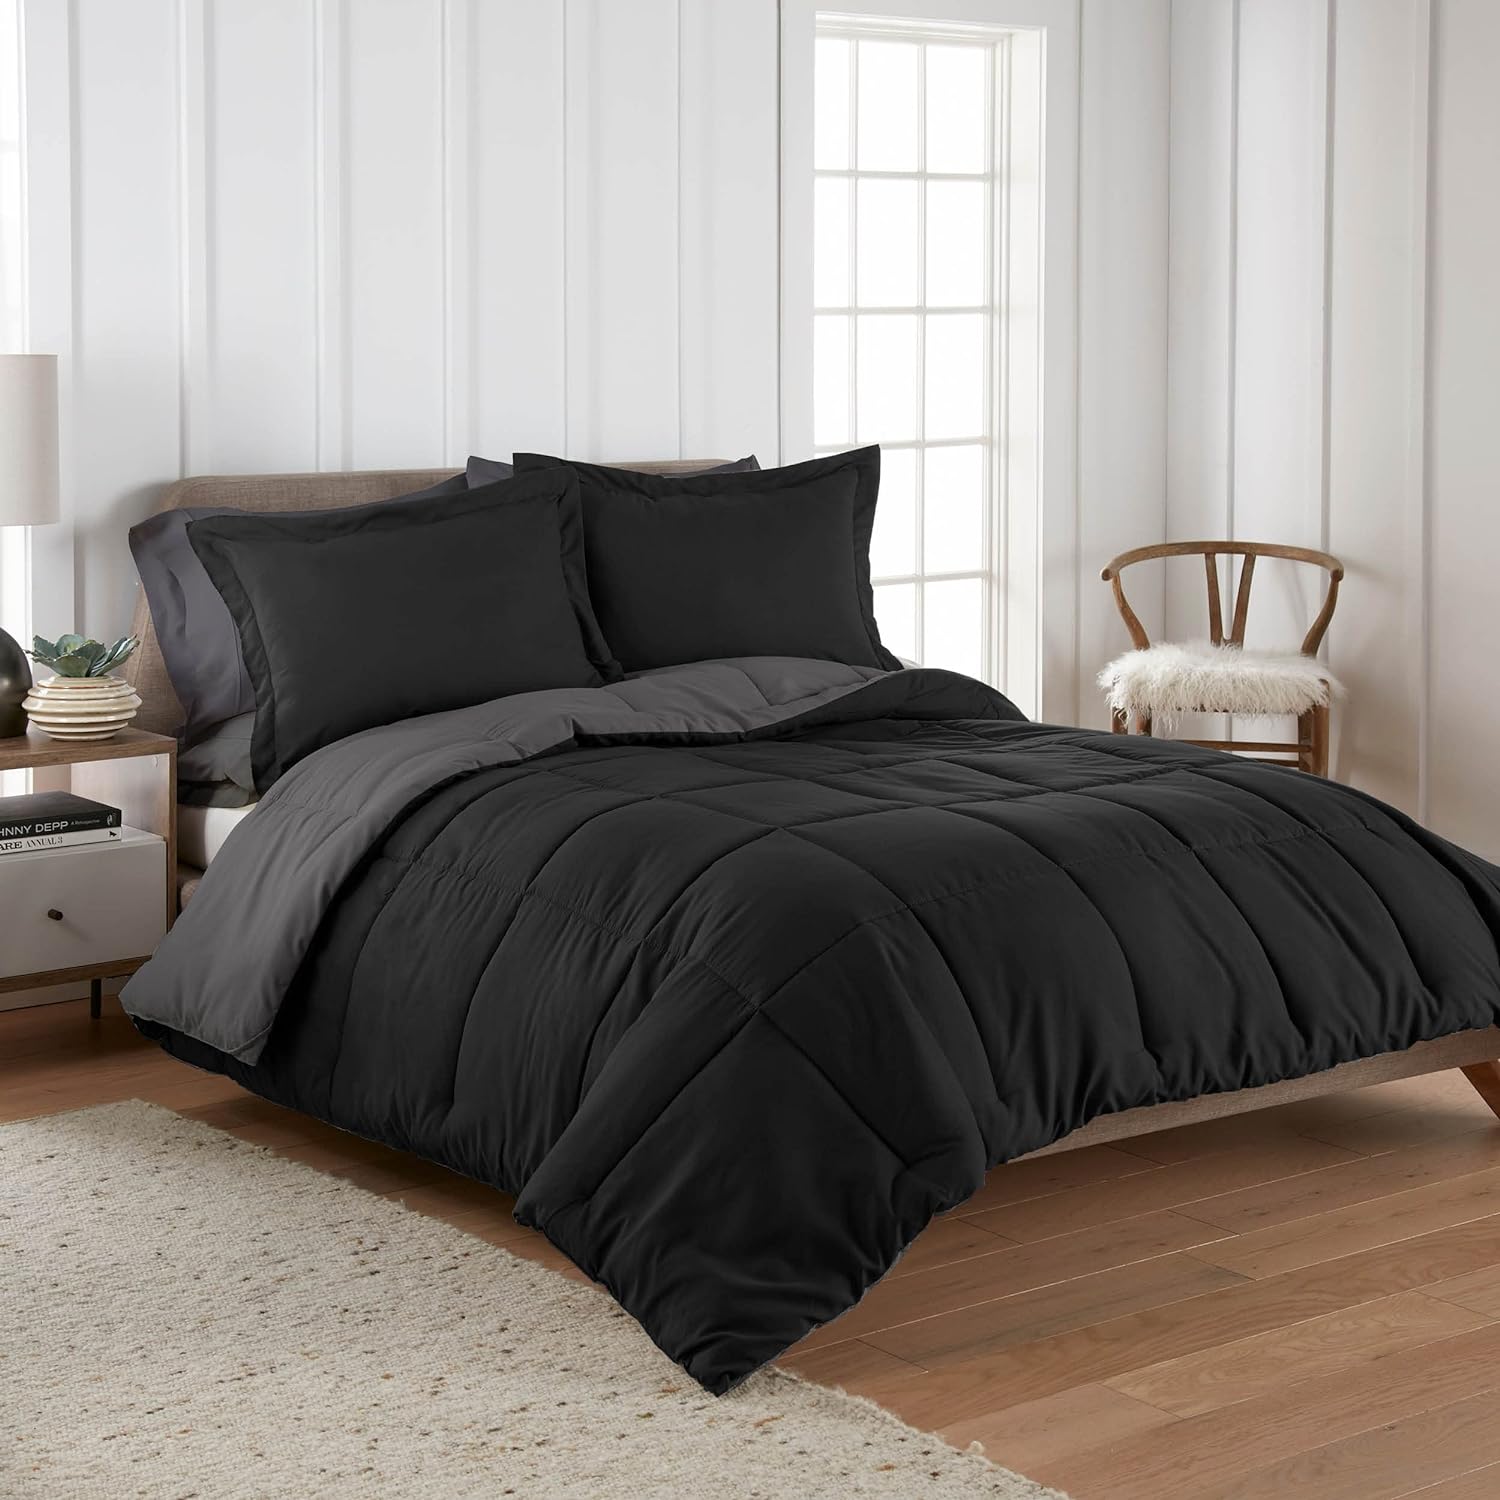 TKM Home 3 Pc Super Soft Black/Grey Reversible Comforter Queen Bed Set Down Alternative Queen Size Bedding Set With 2 Reversi?